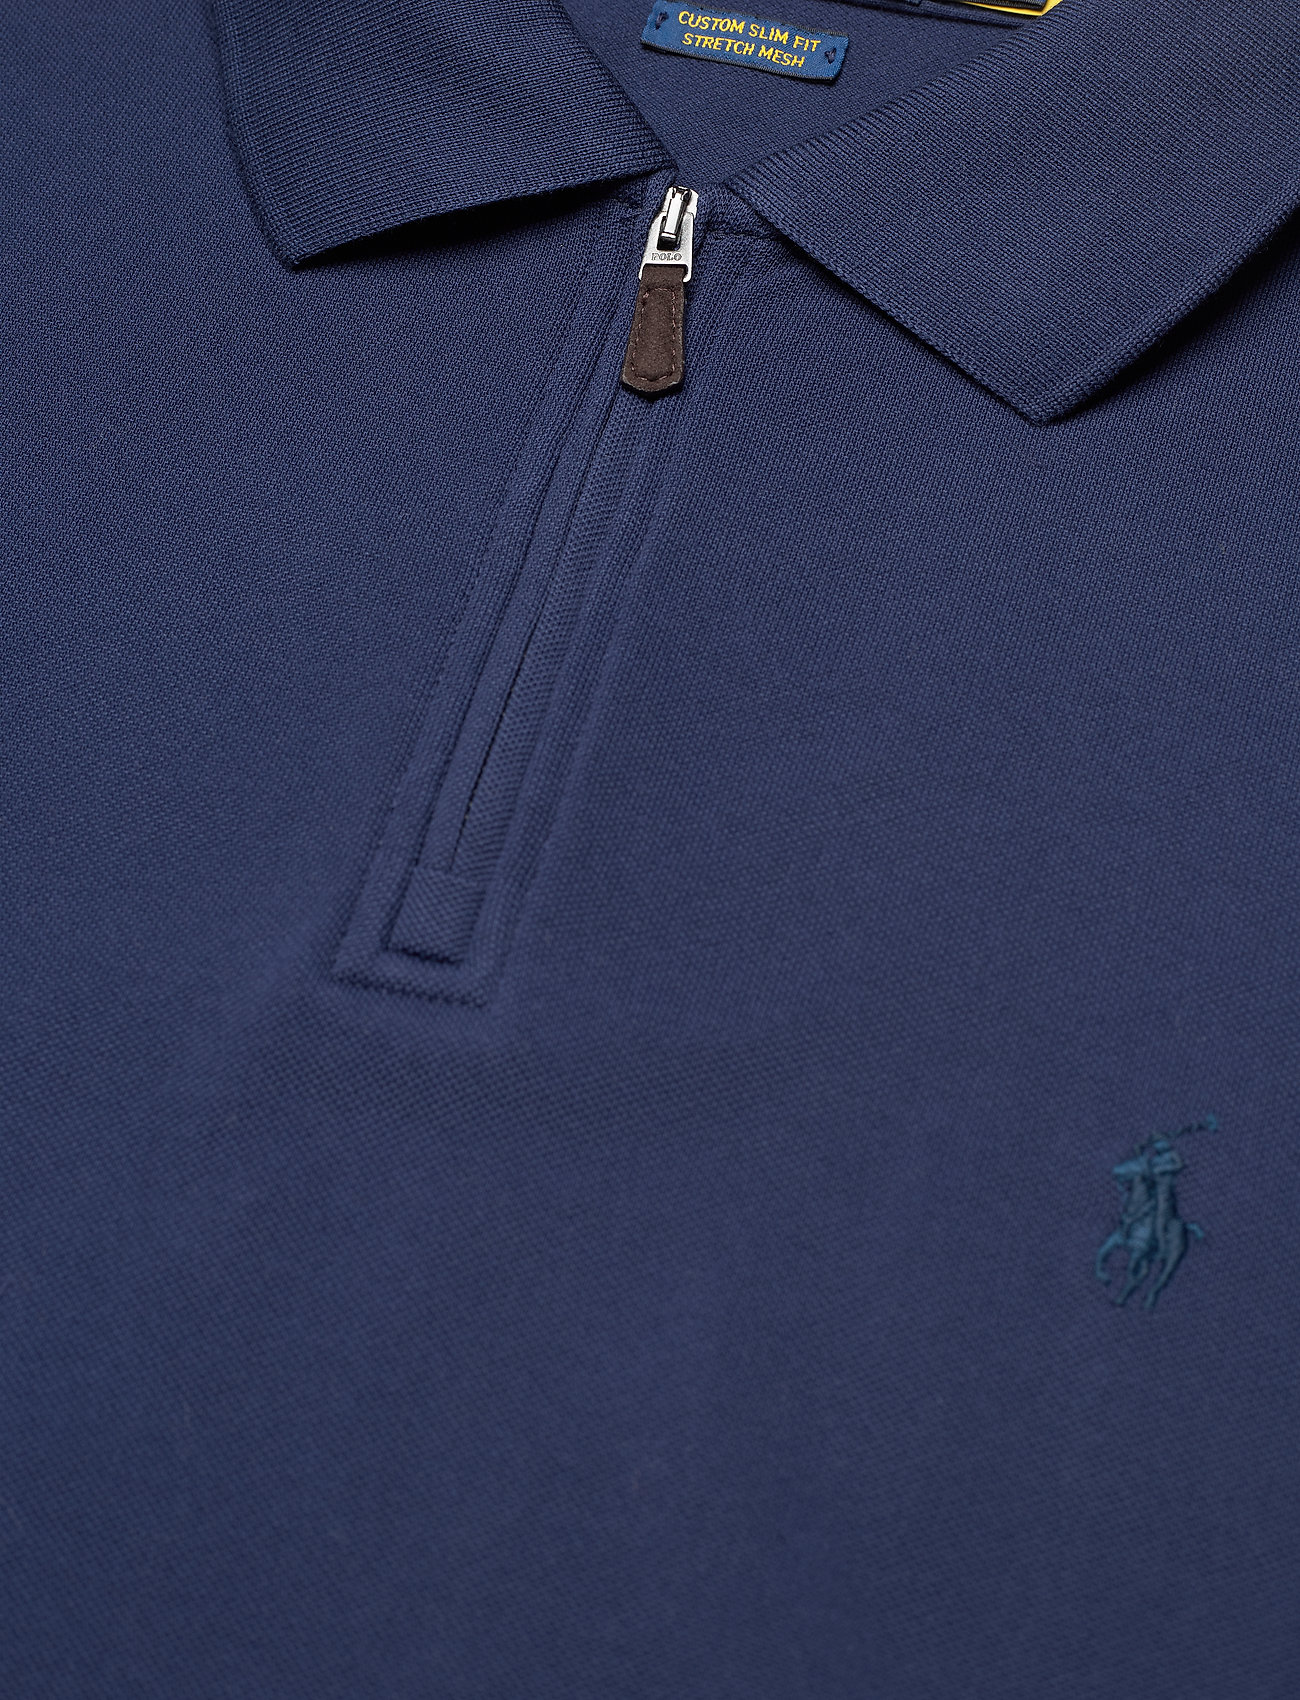 Polo Ralph Lauren - Custom Slim Fit Stretch Mesh Polo Shirt - polos à manches courtes - french navy/c7587 - 3